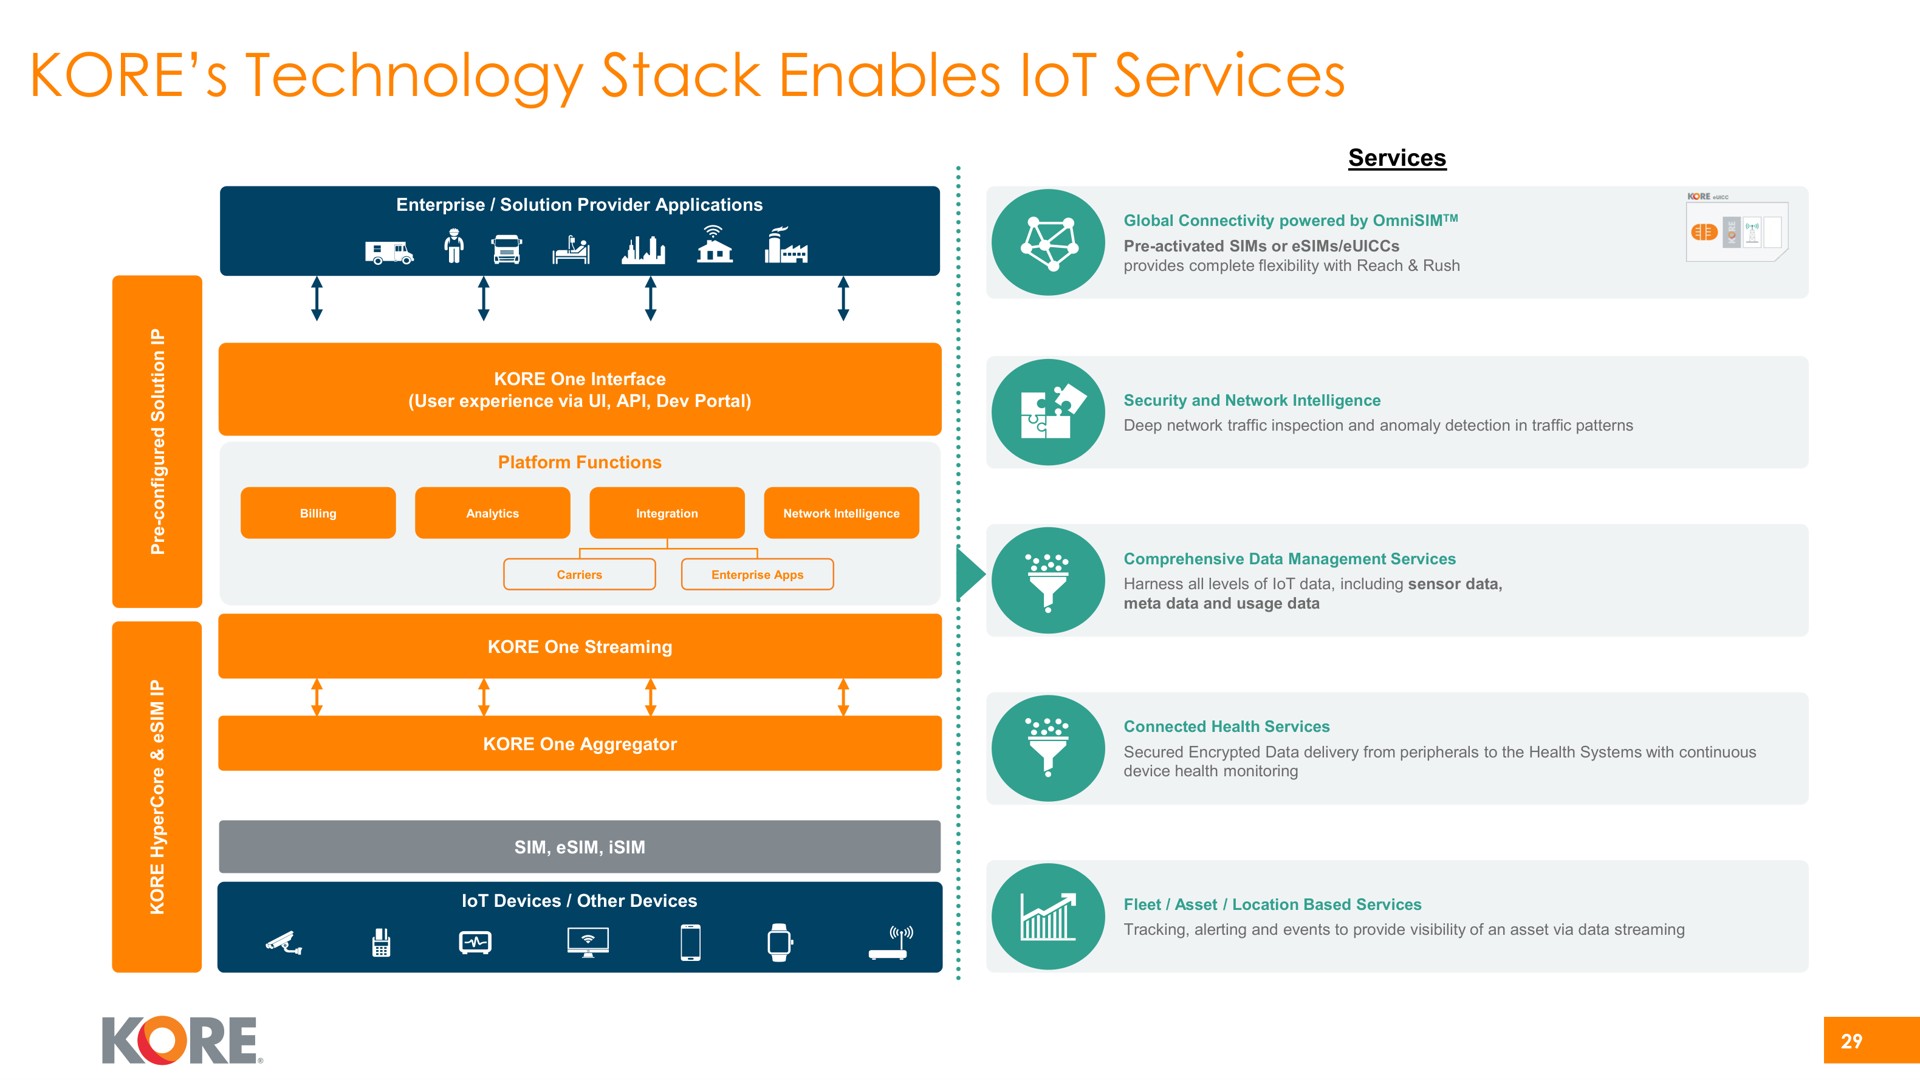 kore technology stack enables services lot | Kore